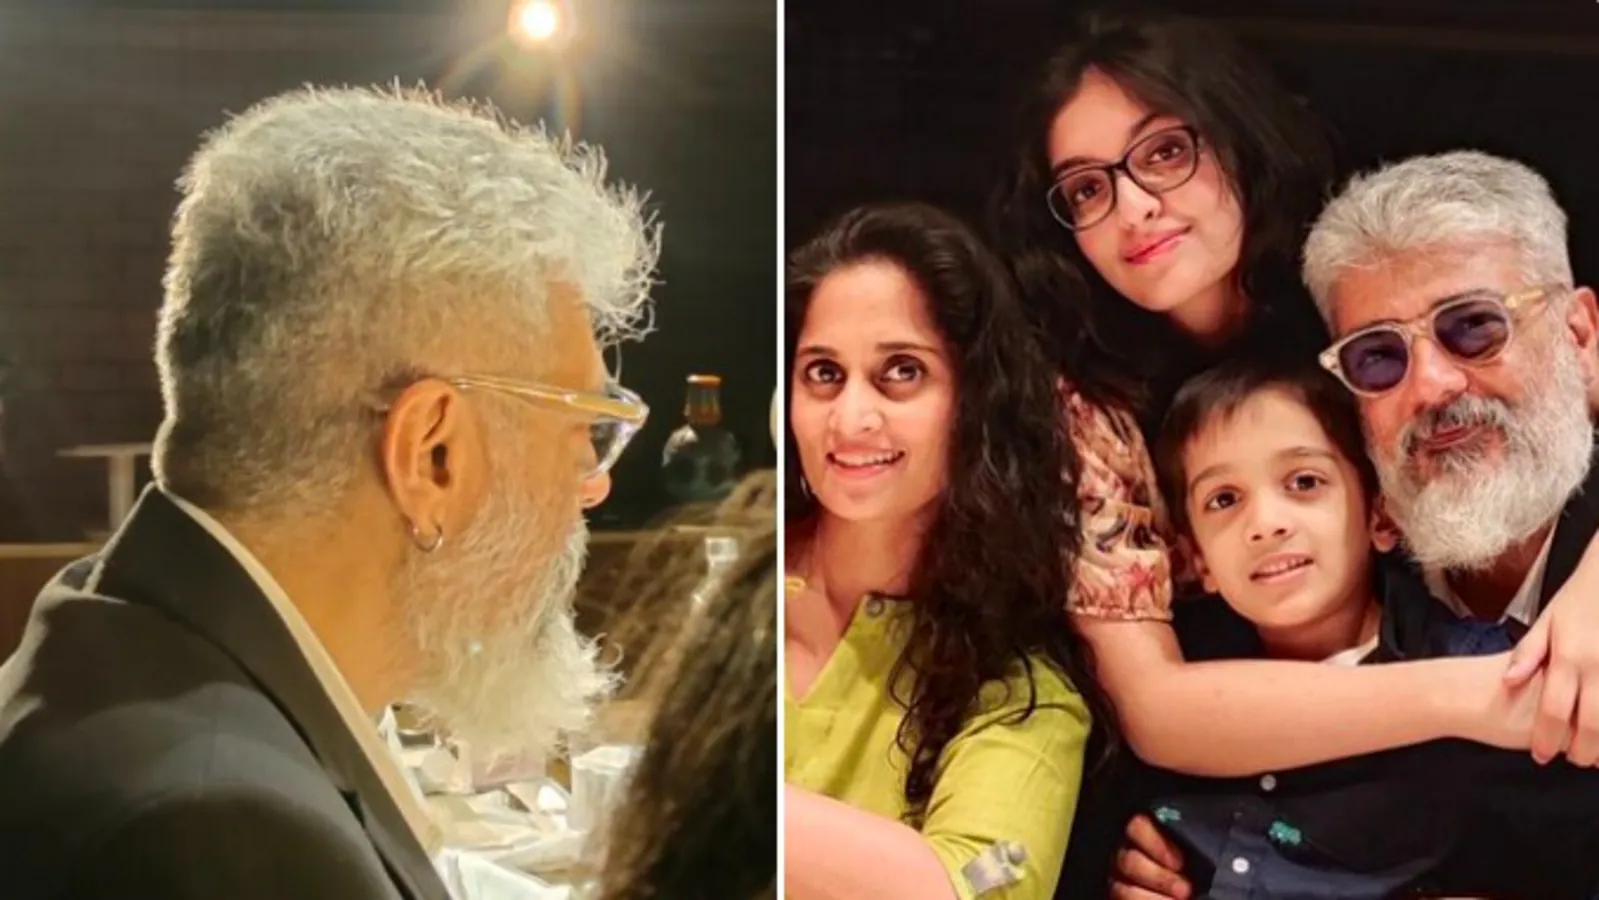 Ajith Kumar poses for family picture on son’s birthday; fans praise his new look